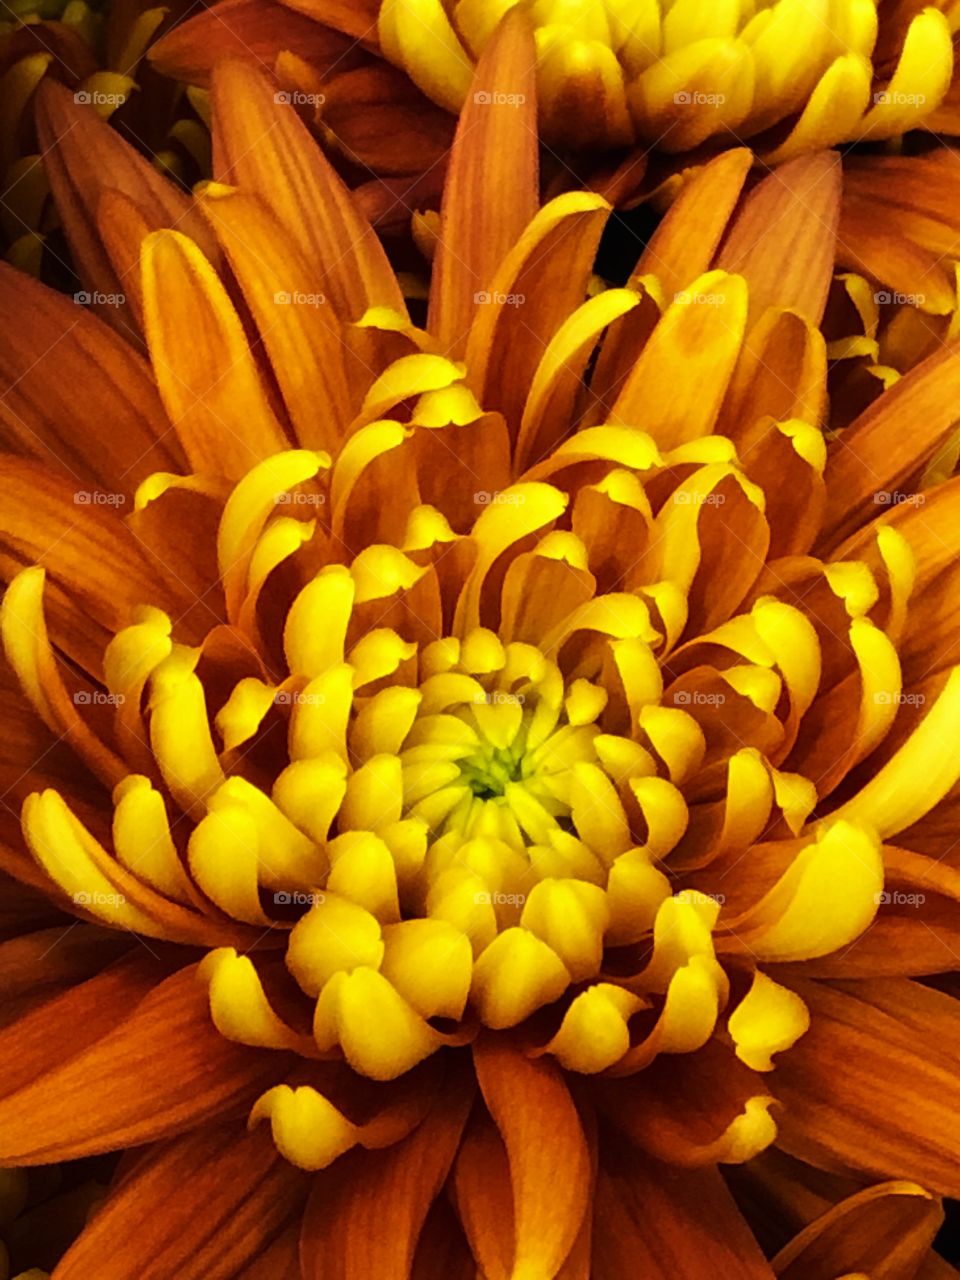 A close-up in a yellow chrysanthemums... Stunning!